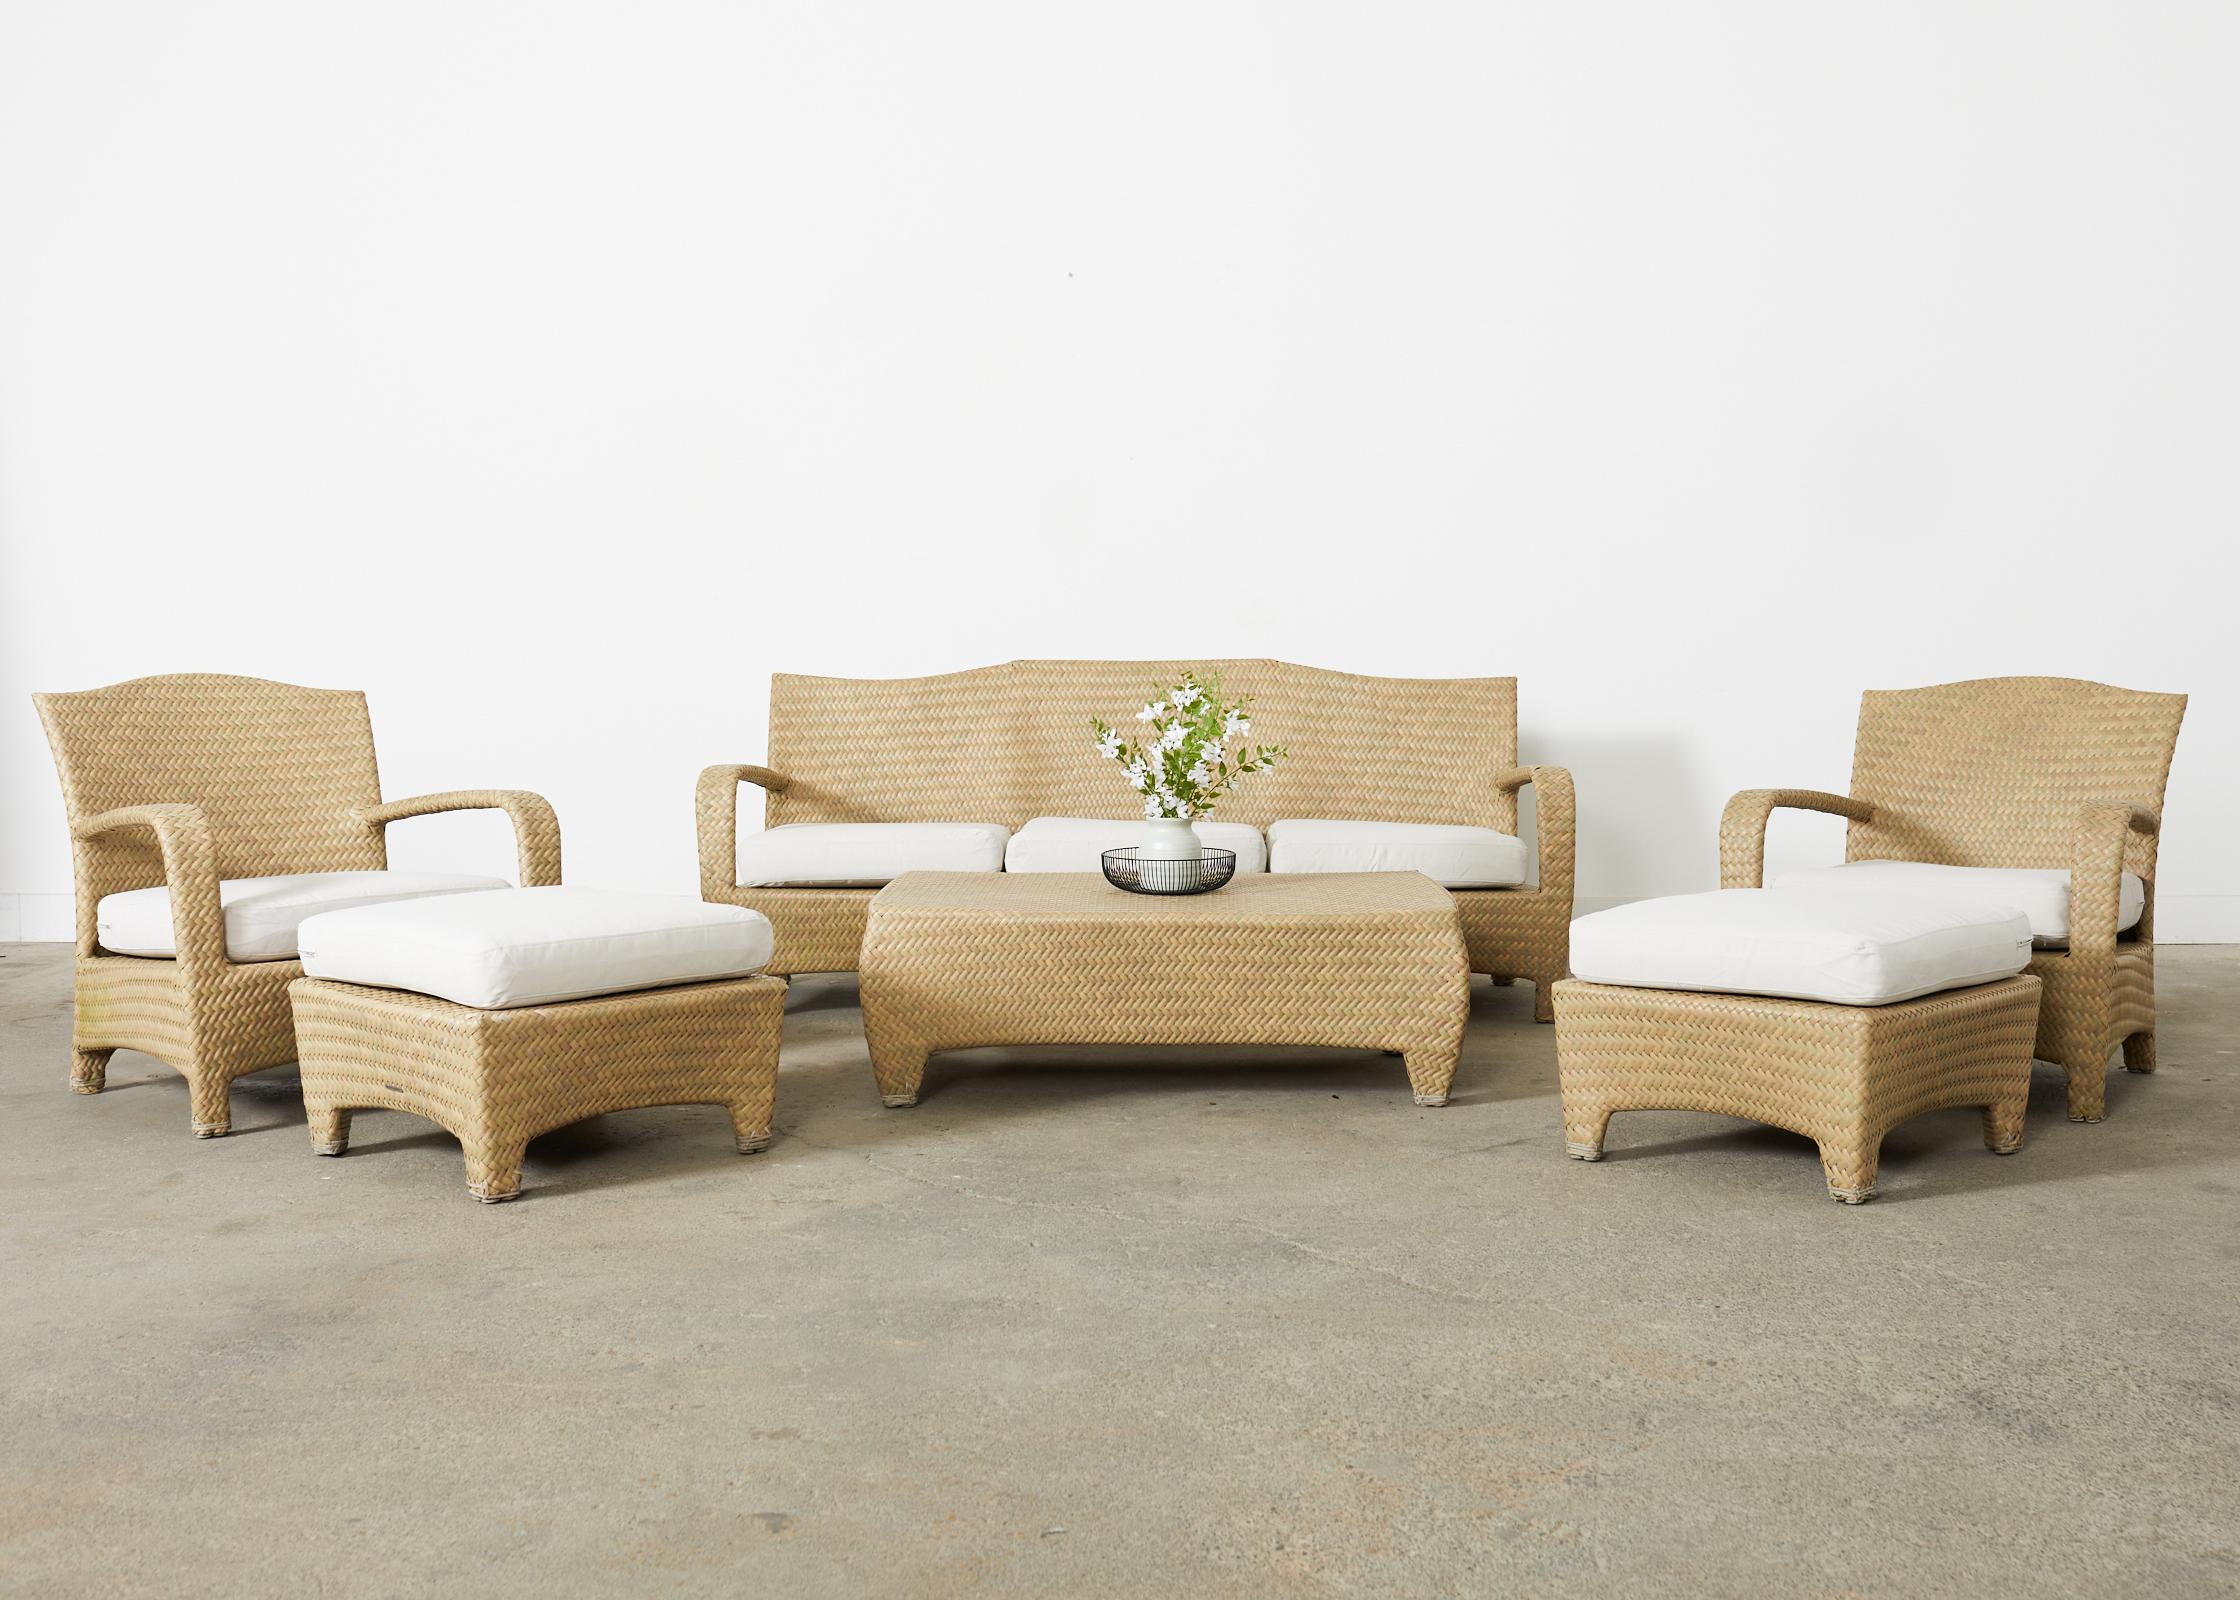 Rare pair of oversized garden lounge chairs and matching ottomans from the Havana collection by Brown Jordan. The set features large aluminum frames wrapped with woven resin wicker in stylish earth toned shades. The armchairs have wide flat arms and